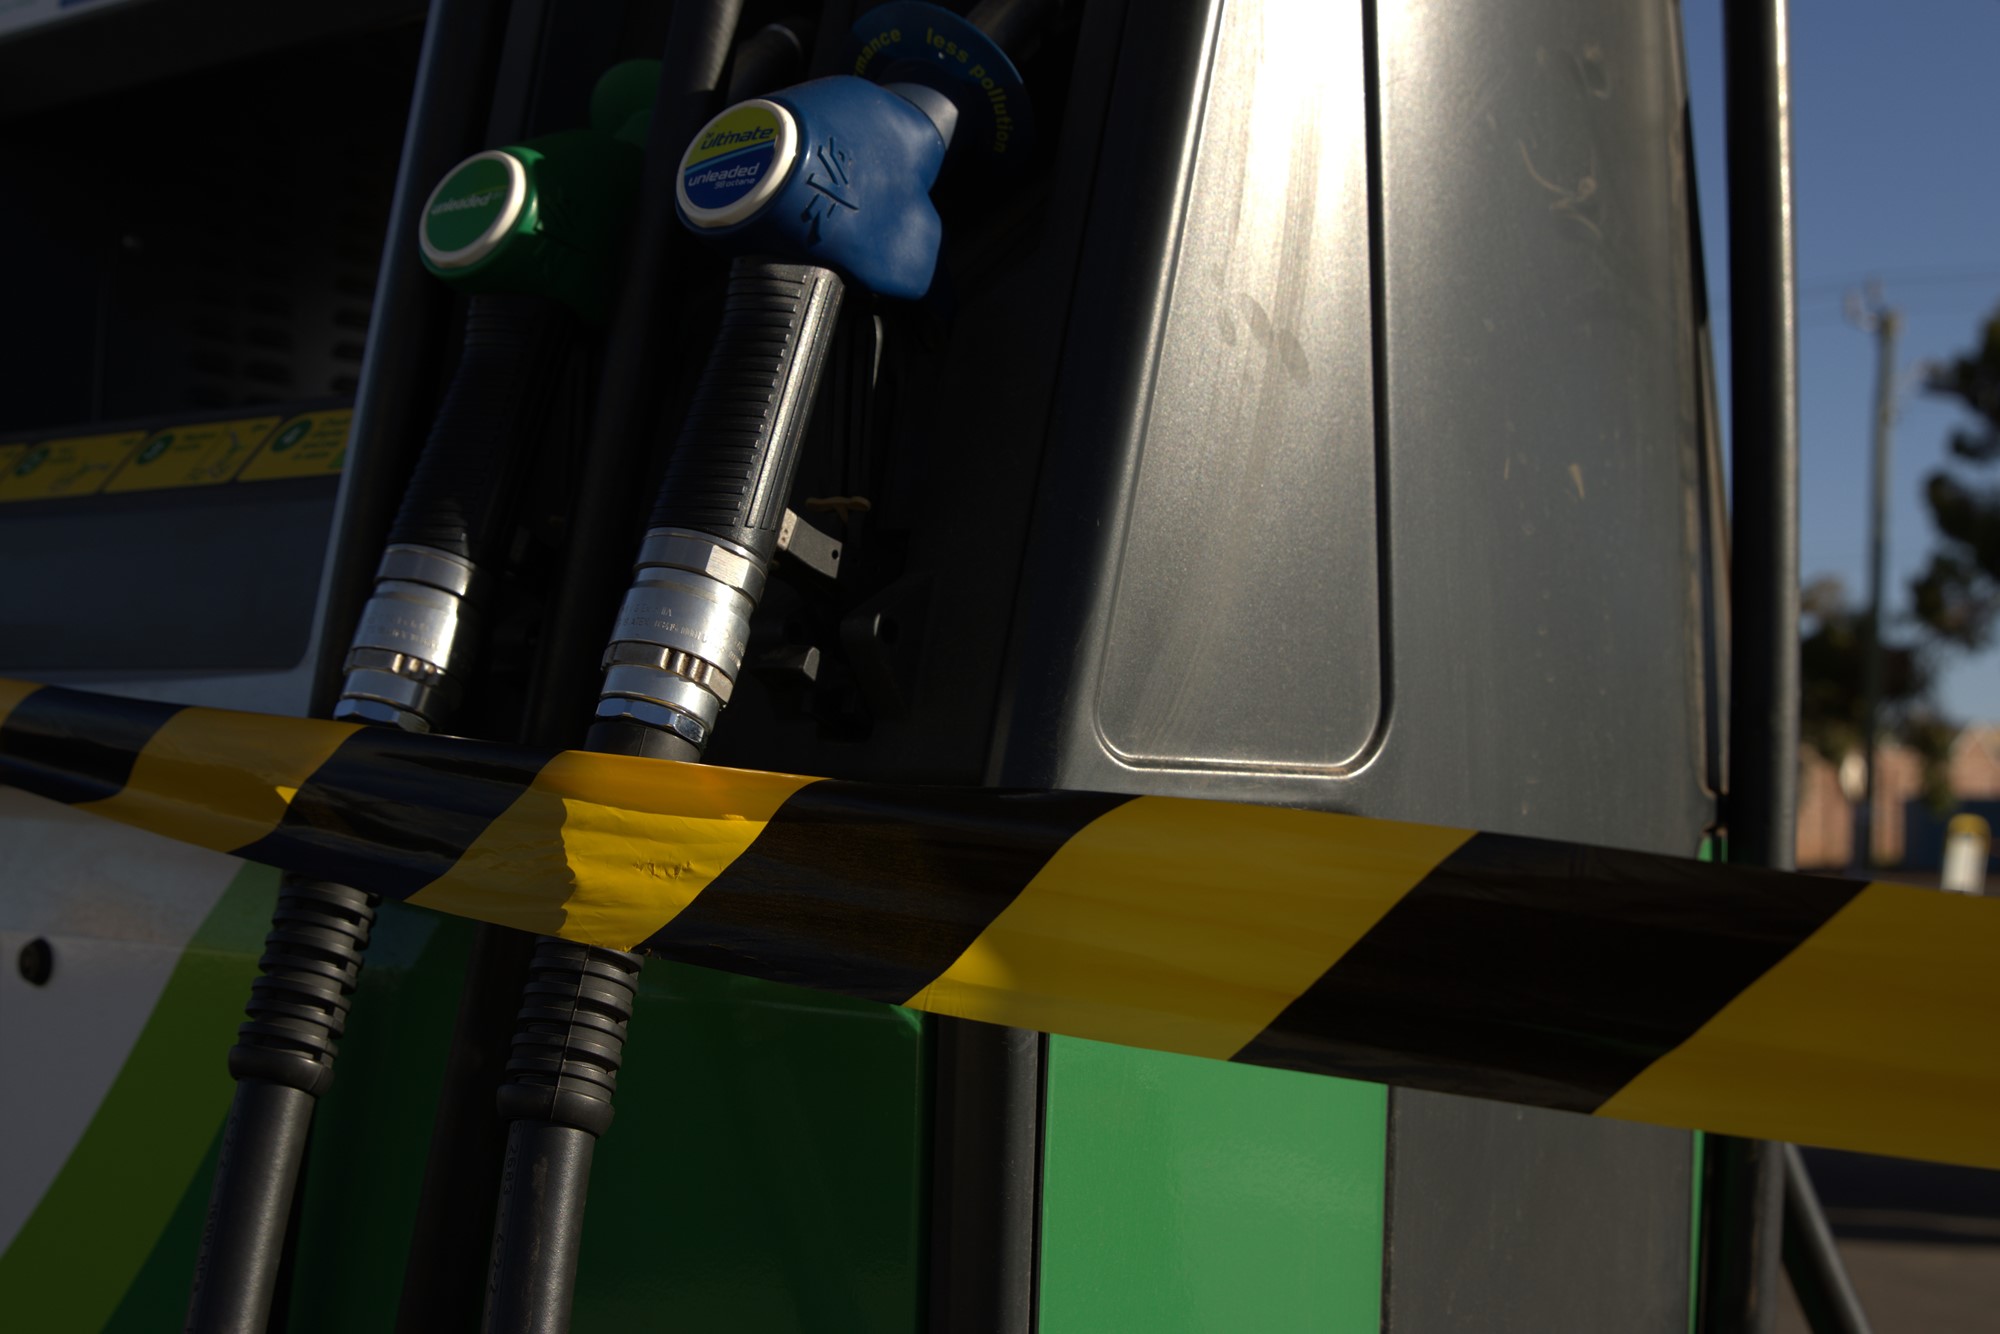 Yellow tape closes off fuel pumps